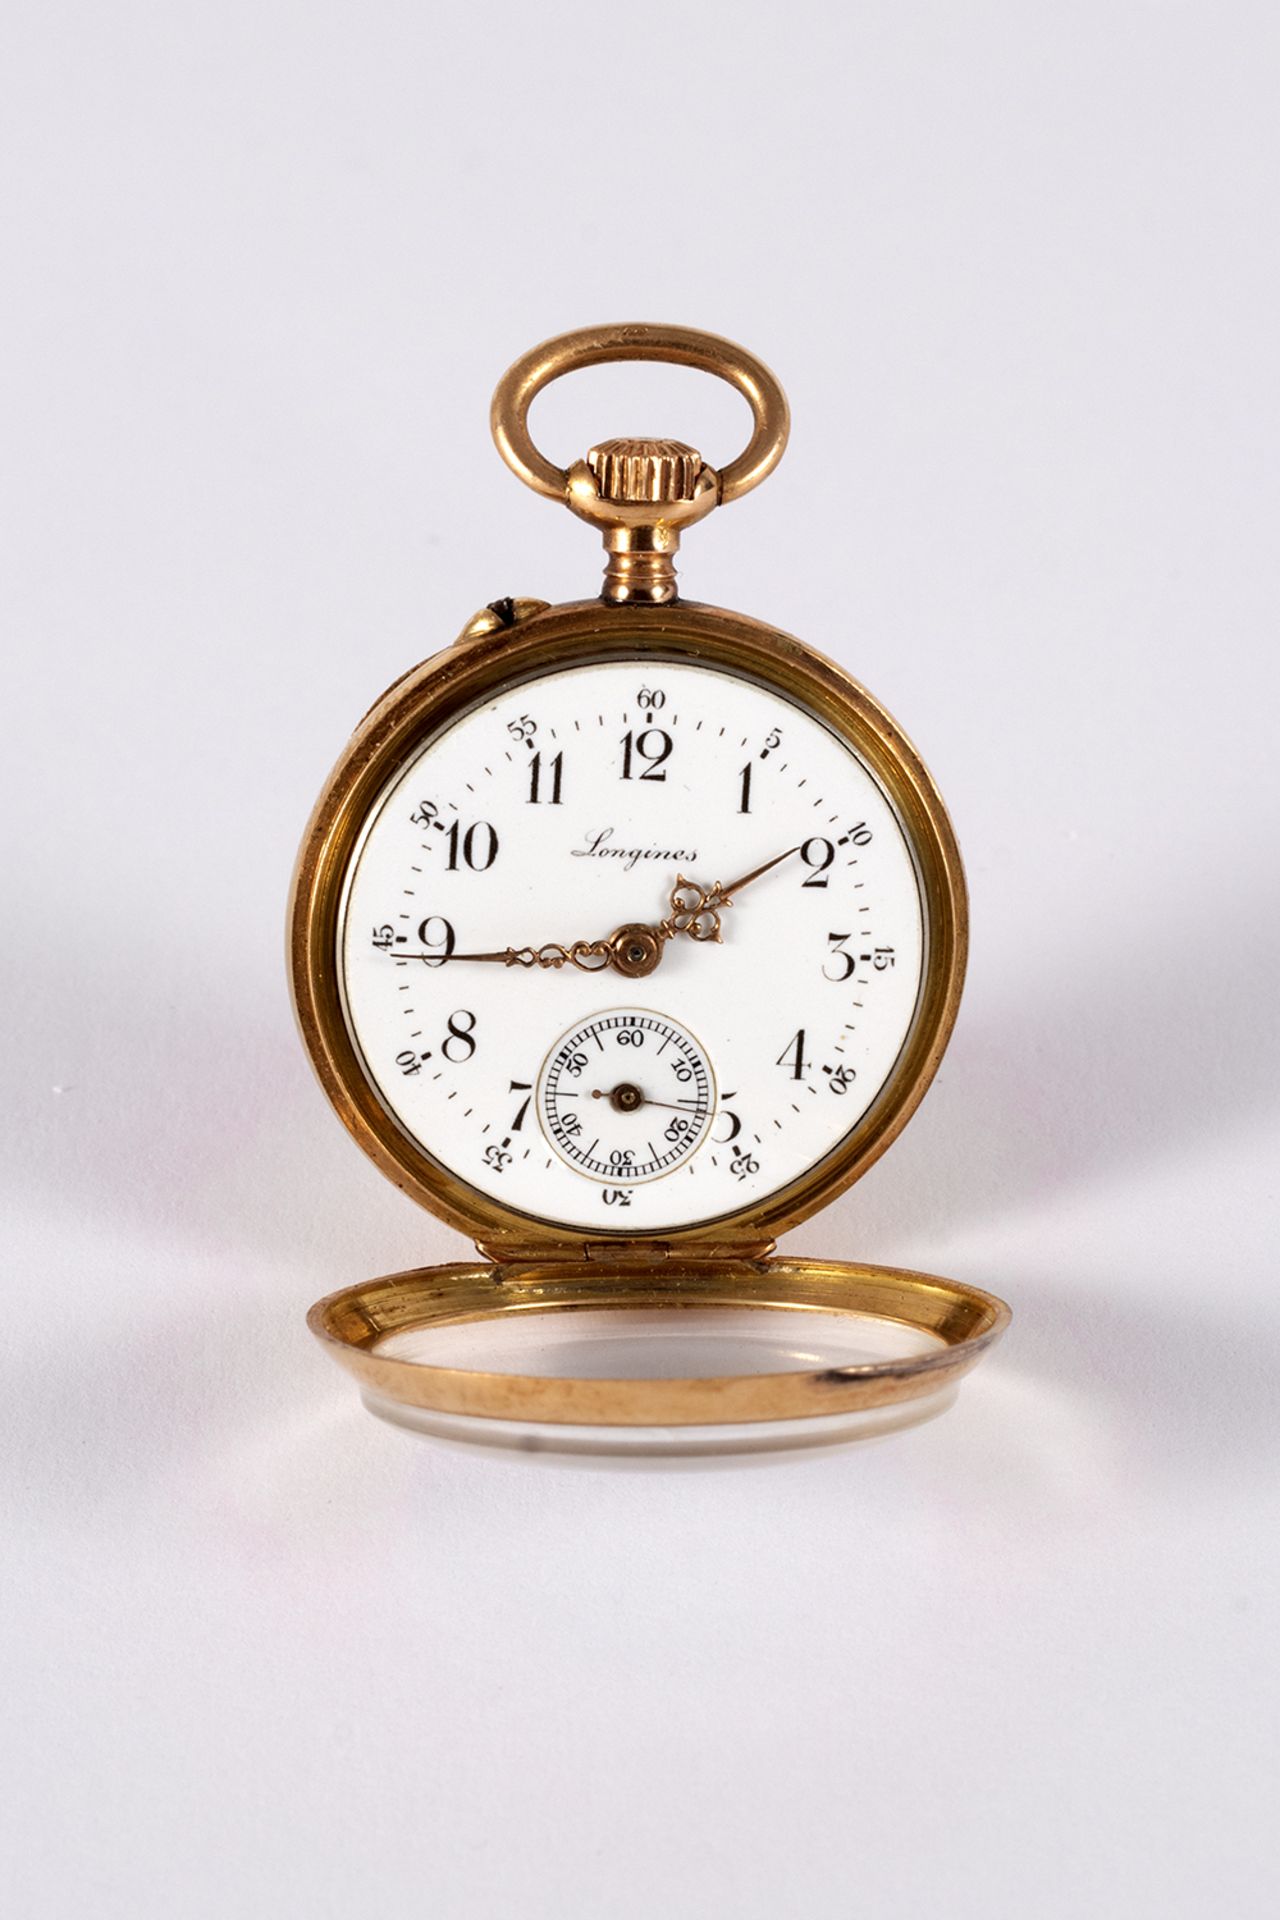 Longines hanging clock in gold, enamelled crown decoration on the reverse - remontaire mechanism. - Image 2 of 4